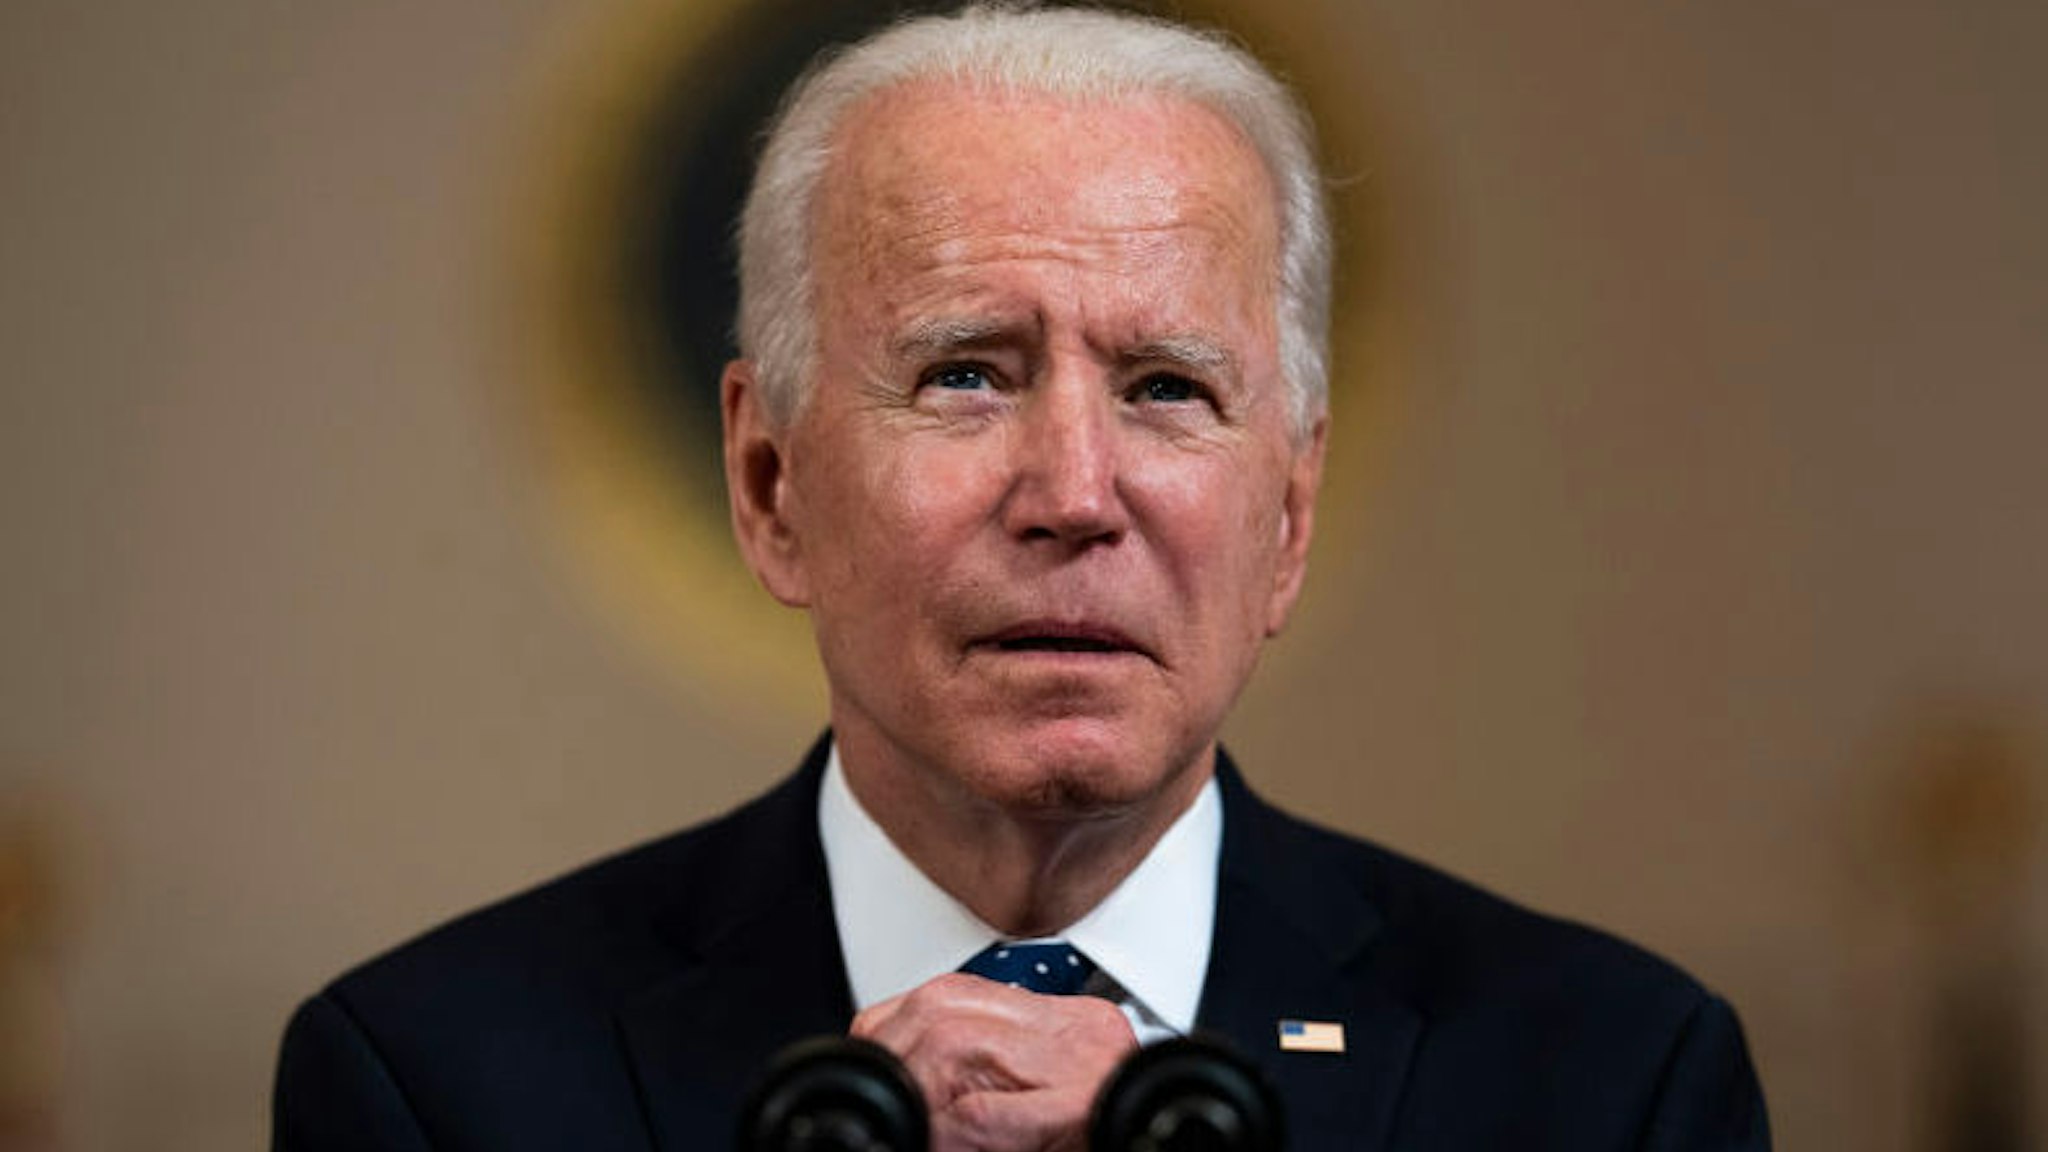 U.S. President Joe Biden makes remarks in response to the verdict in the murder trial of former Minneapolis police officer Derek Chauvin at the Cross Hall of the White House April 20, 2021 in Washington, DC.